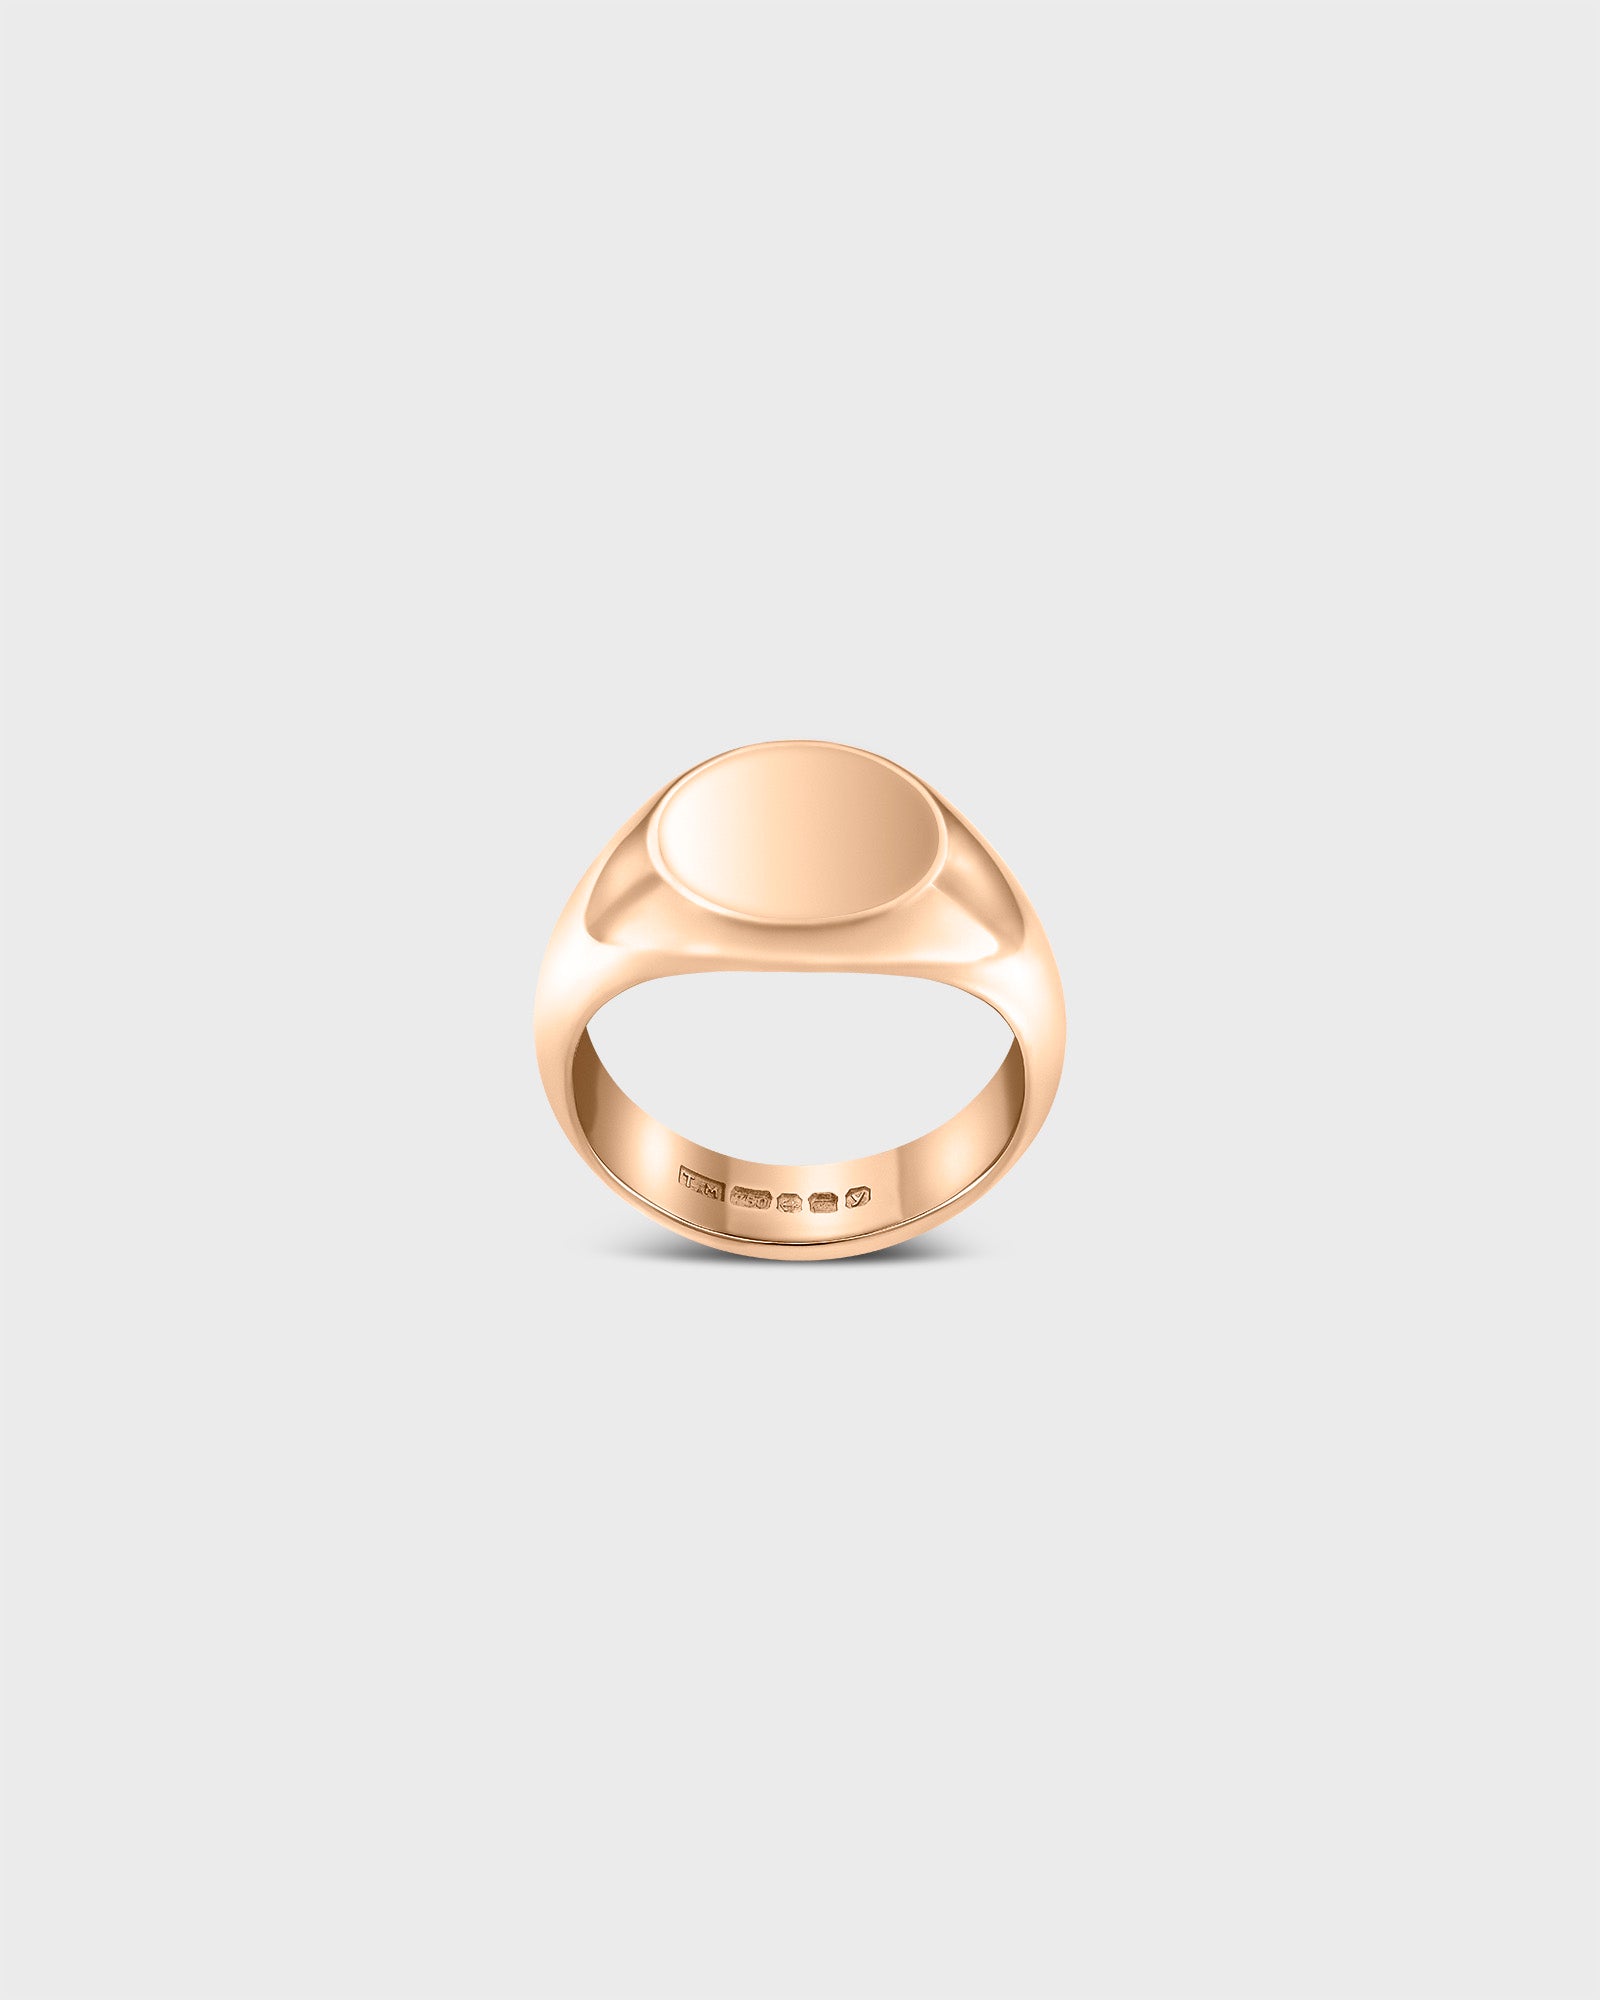 Minimal Circle Signet Ring in 9k Rose Gold by Wilson Grant